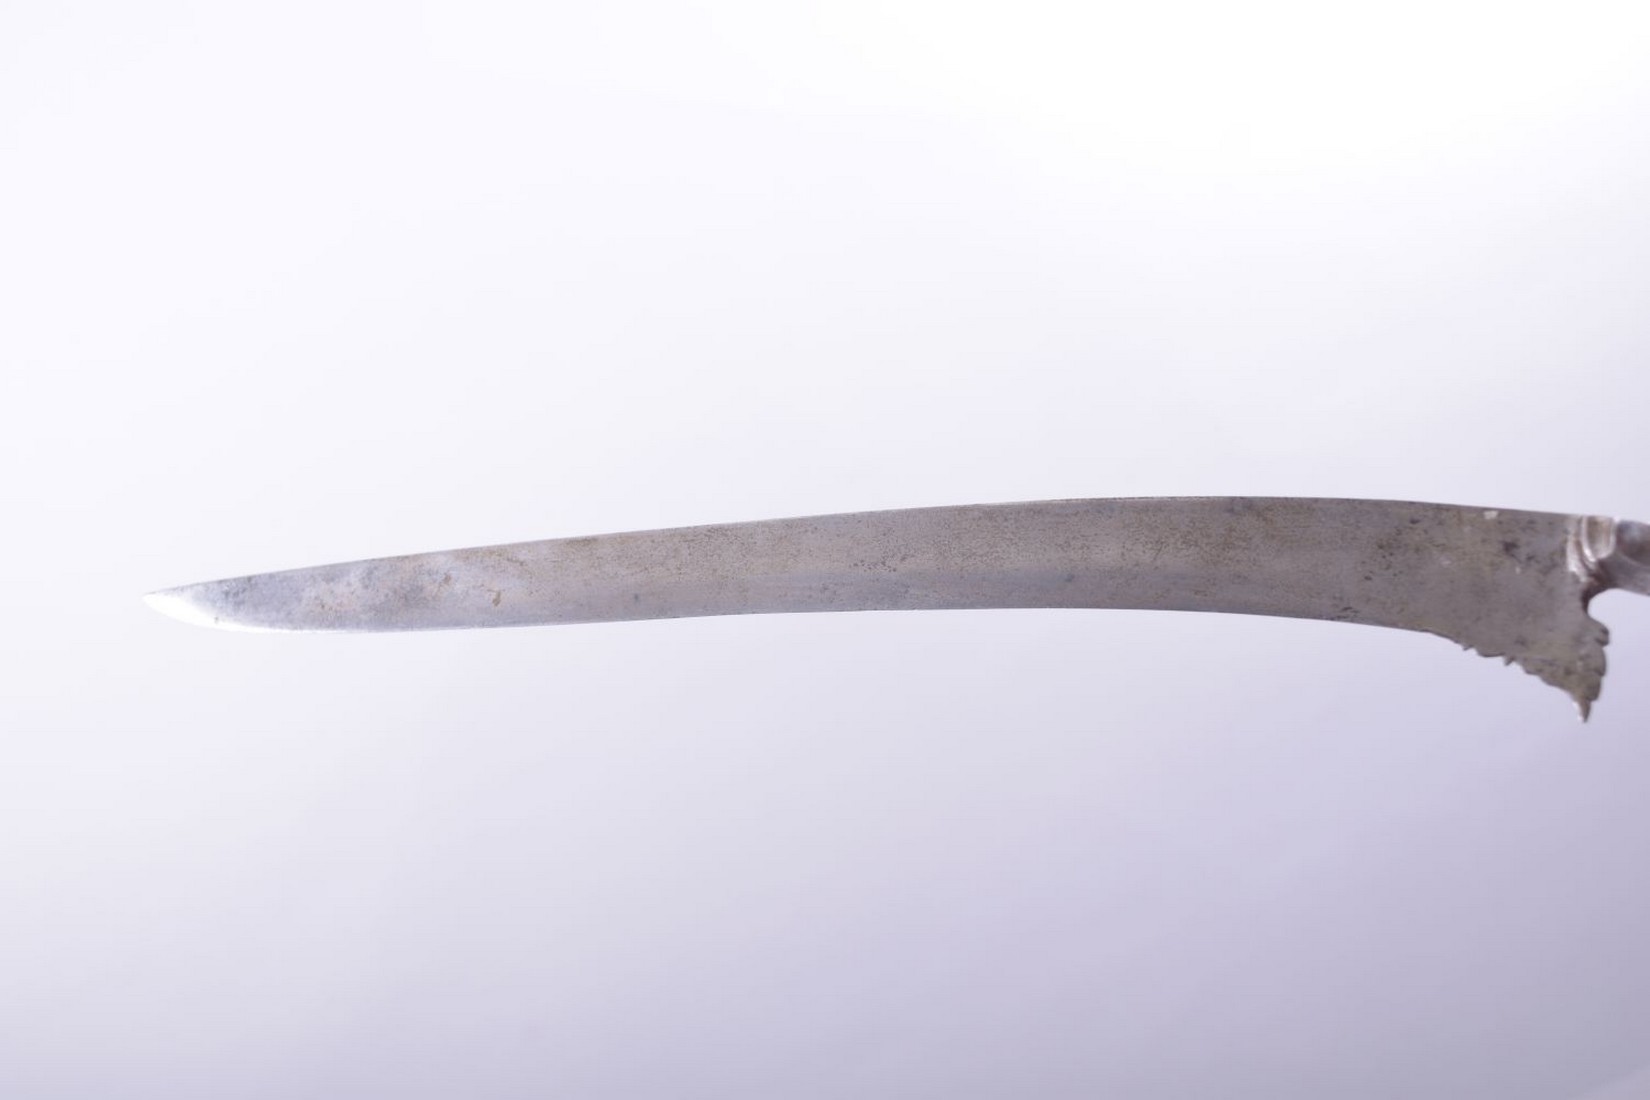 A FINE 18TH CENTURY INDONESIAN RHINO HORN HILTED DAGGER, 44cm long. - Image 6 of 6